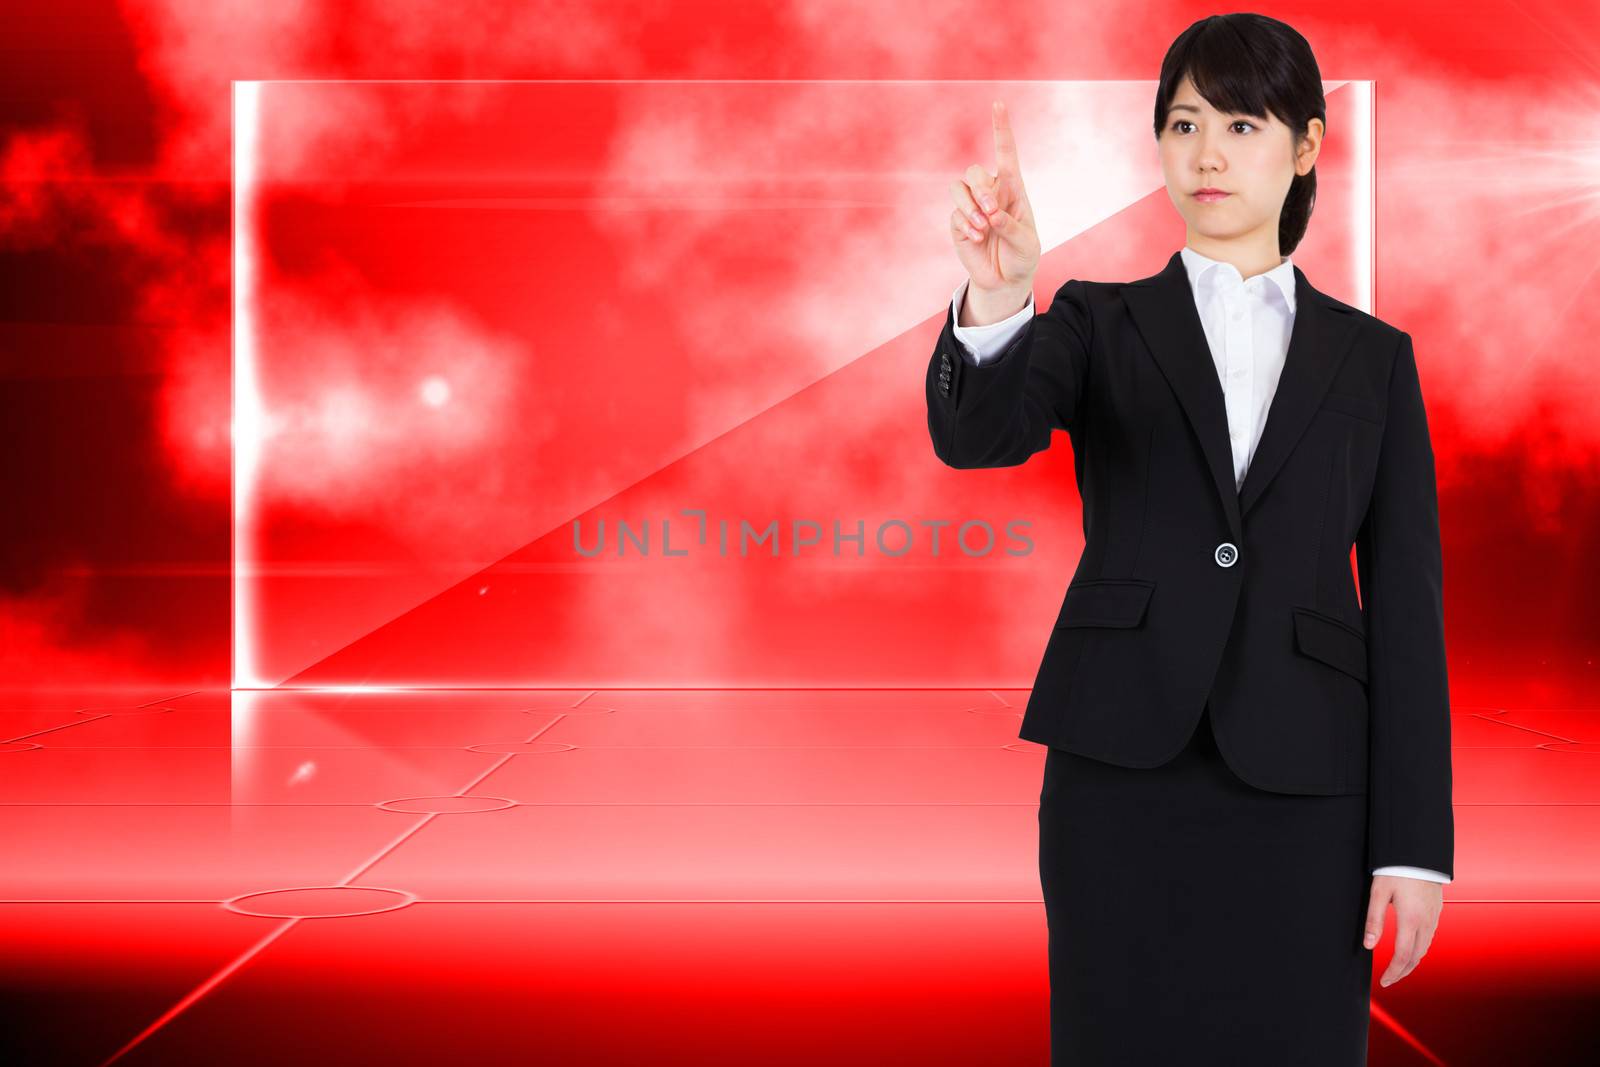 Focused businesswoman pointing against futuristic technology interface